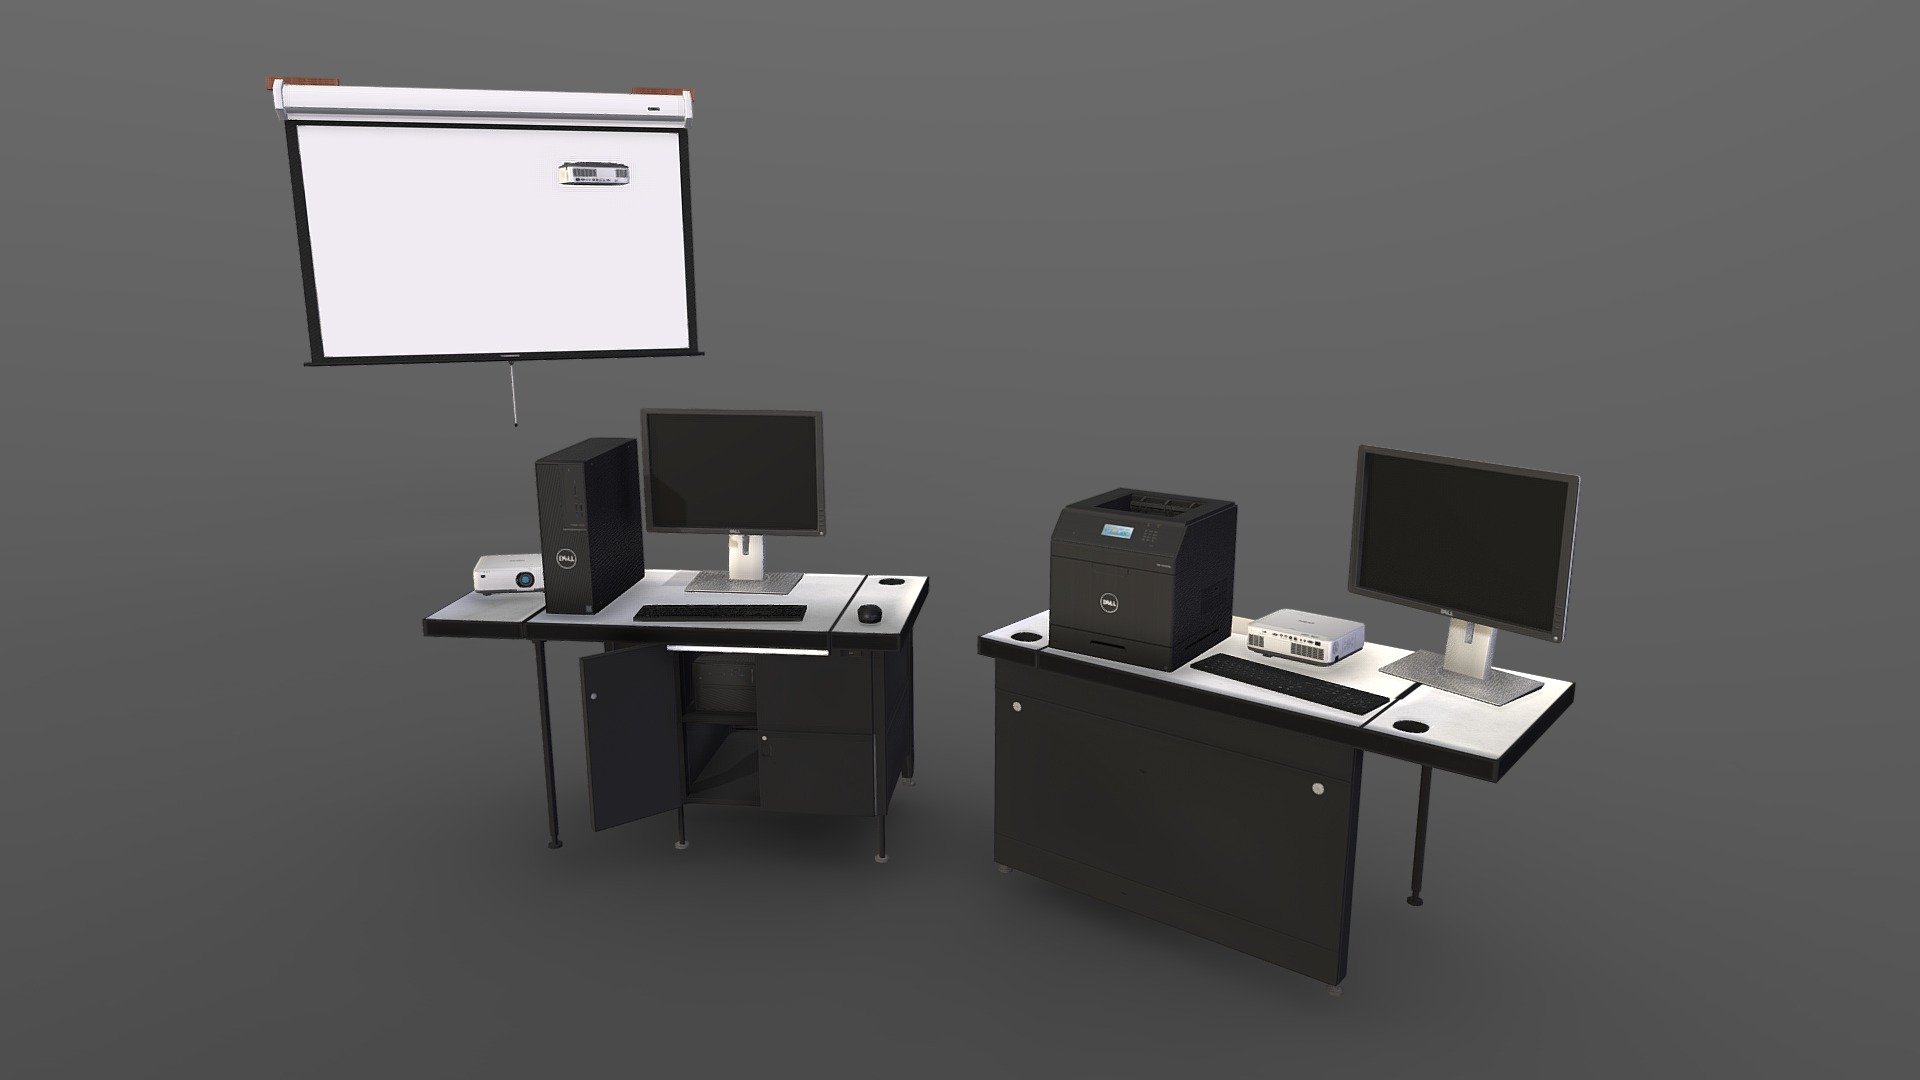 3D Assets for a VR Game for the portfolio class project at HCC. I had the role/job of 3D Artist and was tasked with 3D modeling and texturing assets similarly to their real life counterparts. Then, importing assets to Unity while making sure they work inside the engine.

Credits to DELL for logos/original product designs and NEC plus other branding included. Some textures were custom made/tweaked in Photoshop, but most assets I did use official/external logos. Assets not for sale, made for educational purposes.

Special thanks to family and friends, class peers and prof. Chris Khuong for everything. Learned a lot while doing these assets.

Software used, blender and substance painter. Assets will be used inside Unity. Workflow includes baking with high to low poly models. Maya was used for re-topo revisions for some instances.

Thanks for your visit - Jesus Fernandez Garcia 3D VR Game Assets - 3D model by Jesus Fernandez Garcia (@jamyzgenius) 3d model